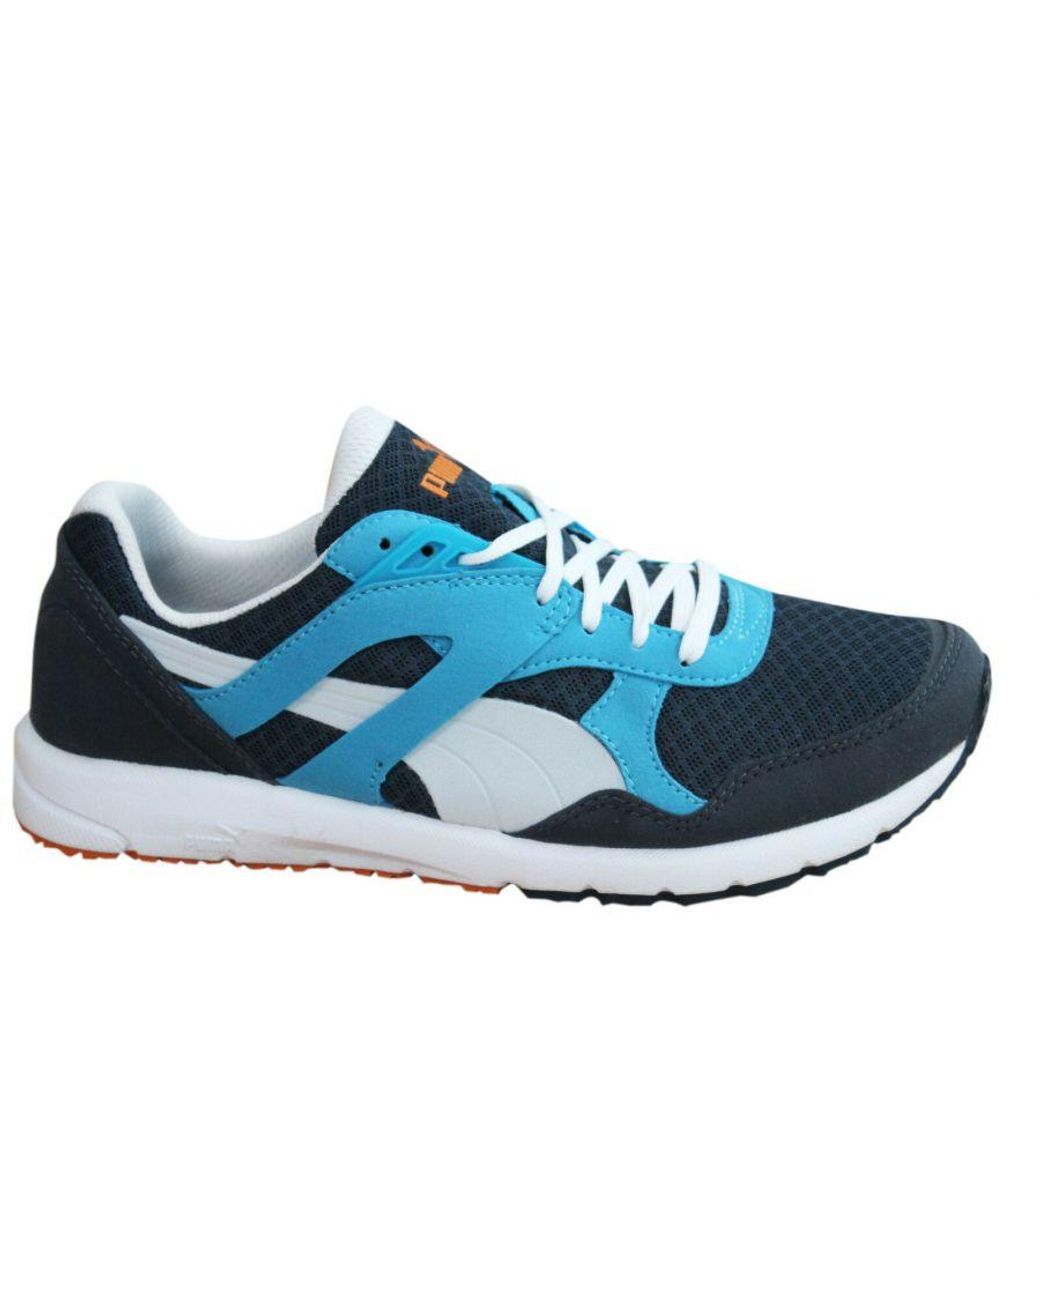 PUMA Future R698 Lite Trainers Running Shoes Lace Up Blue 354999 01 B83d  for Men | Lyst UK